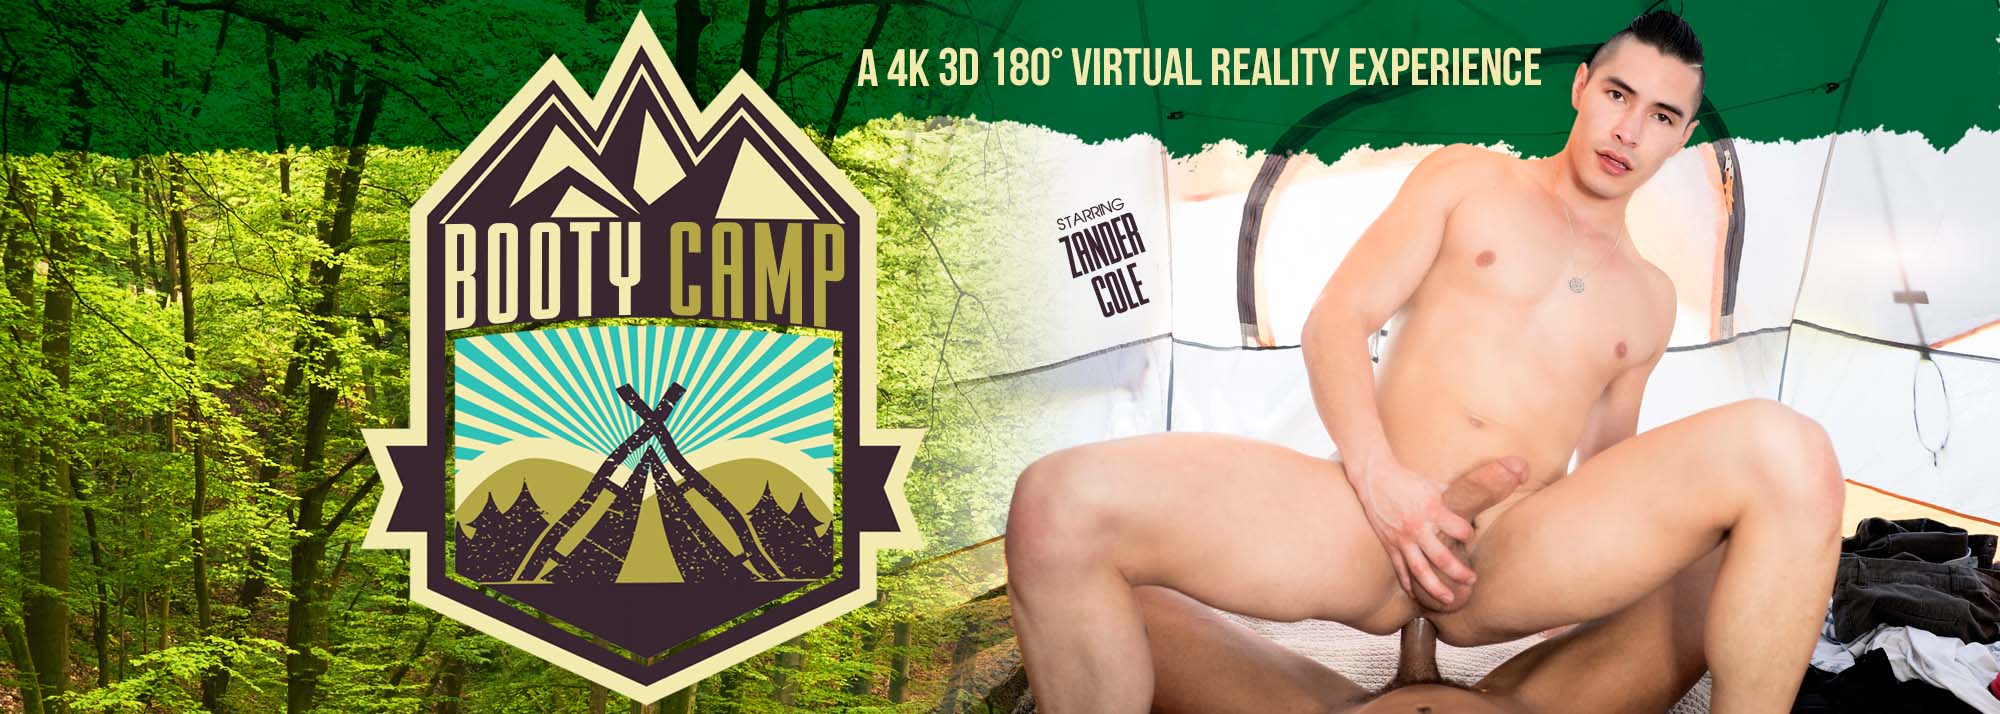 Booty Camp - Gay VR Porn Video, Starring: Zander Cole